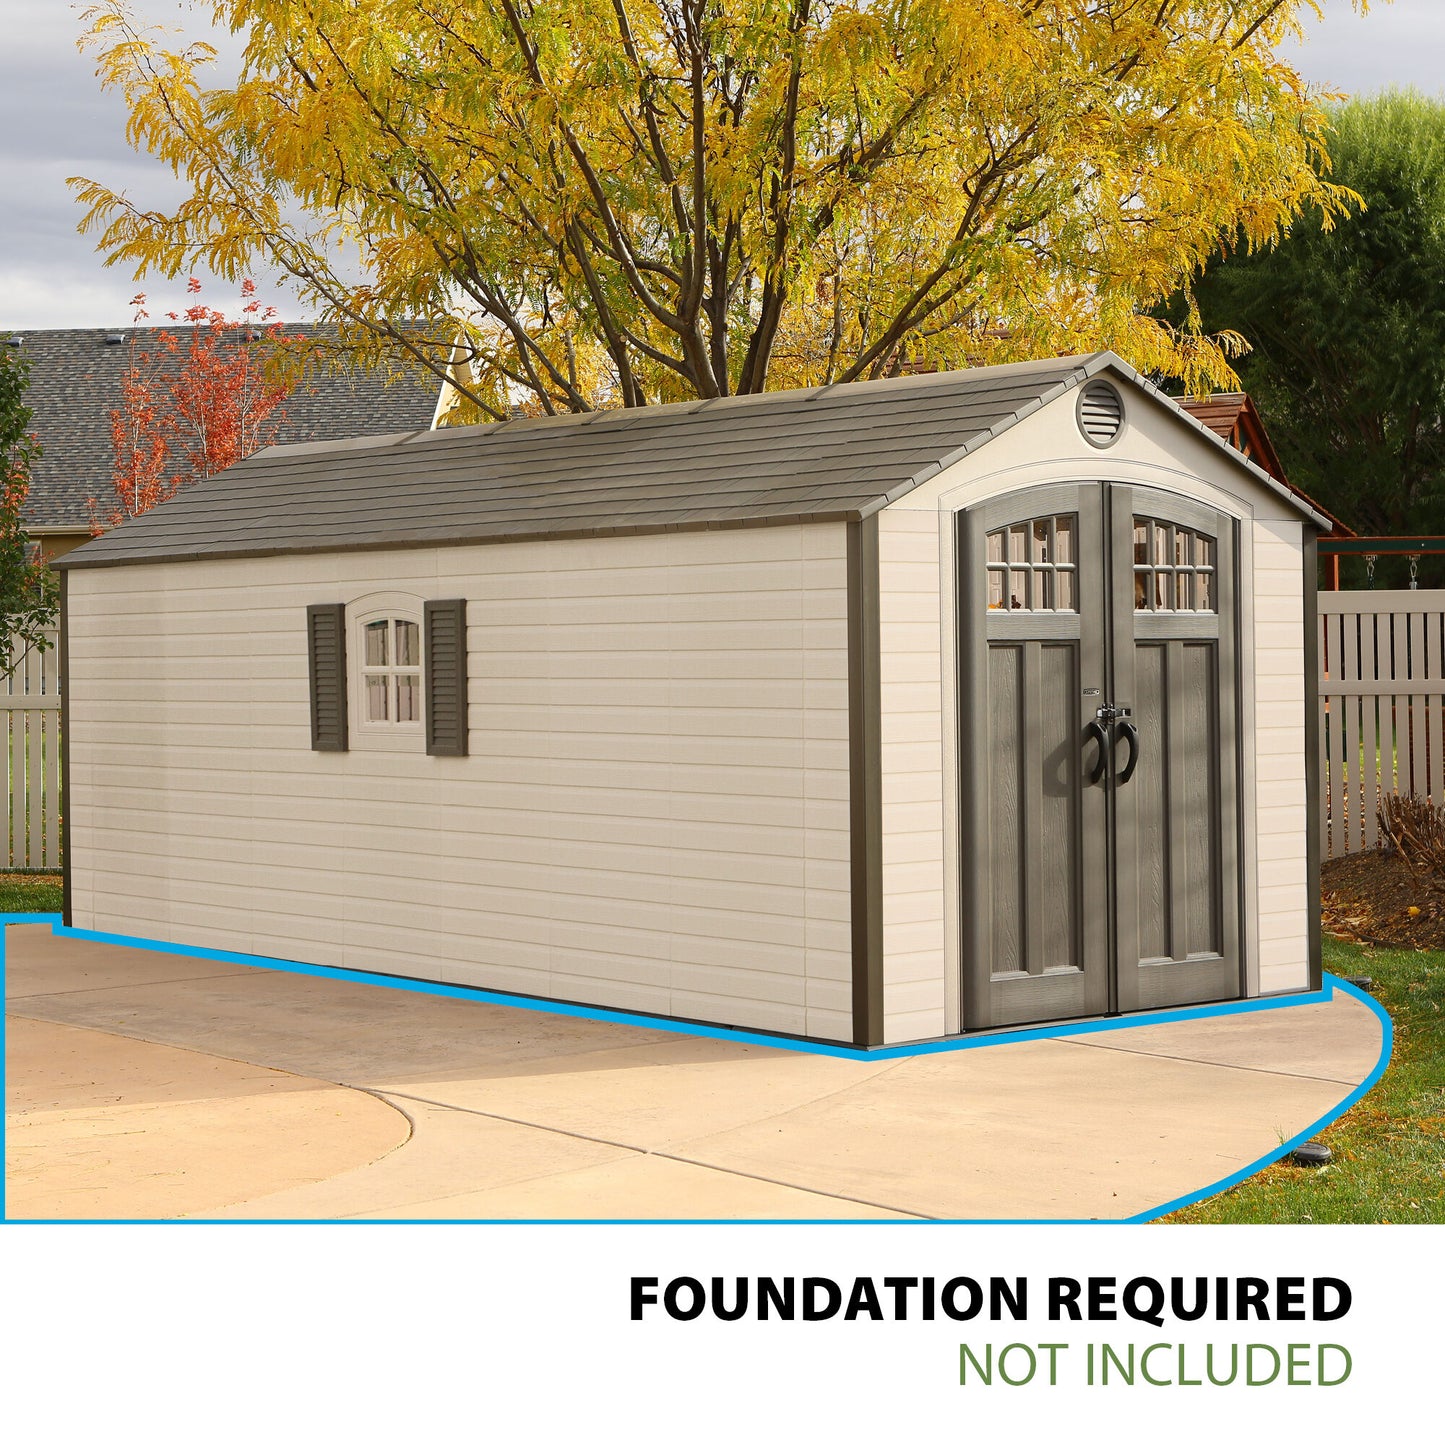 Lifetime 8 Ft. x 20 Ft. Outdoor Storage Shed (60120)